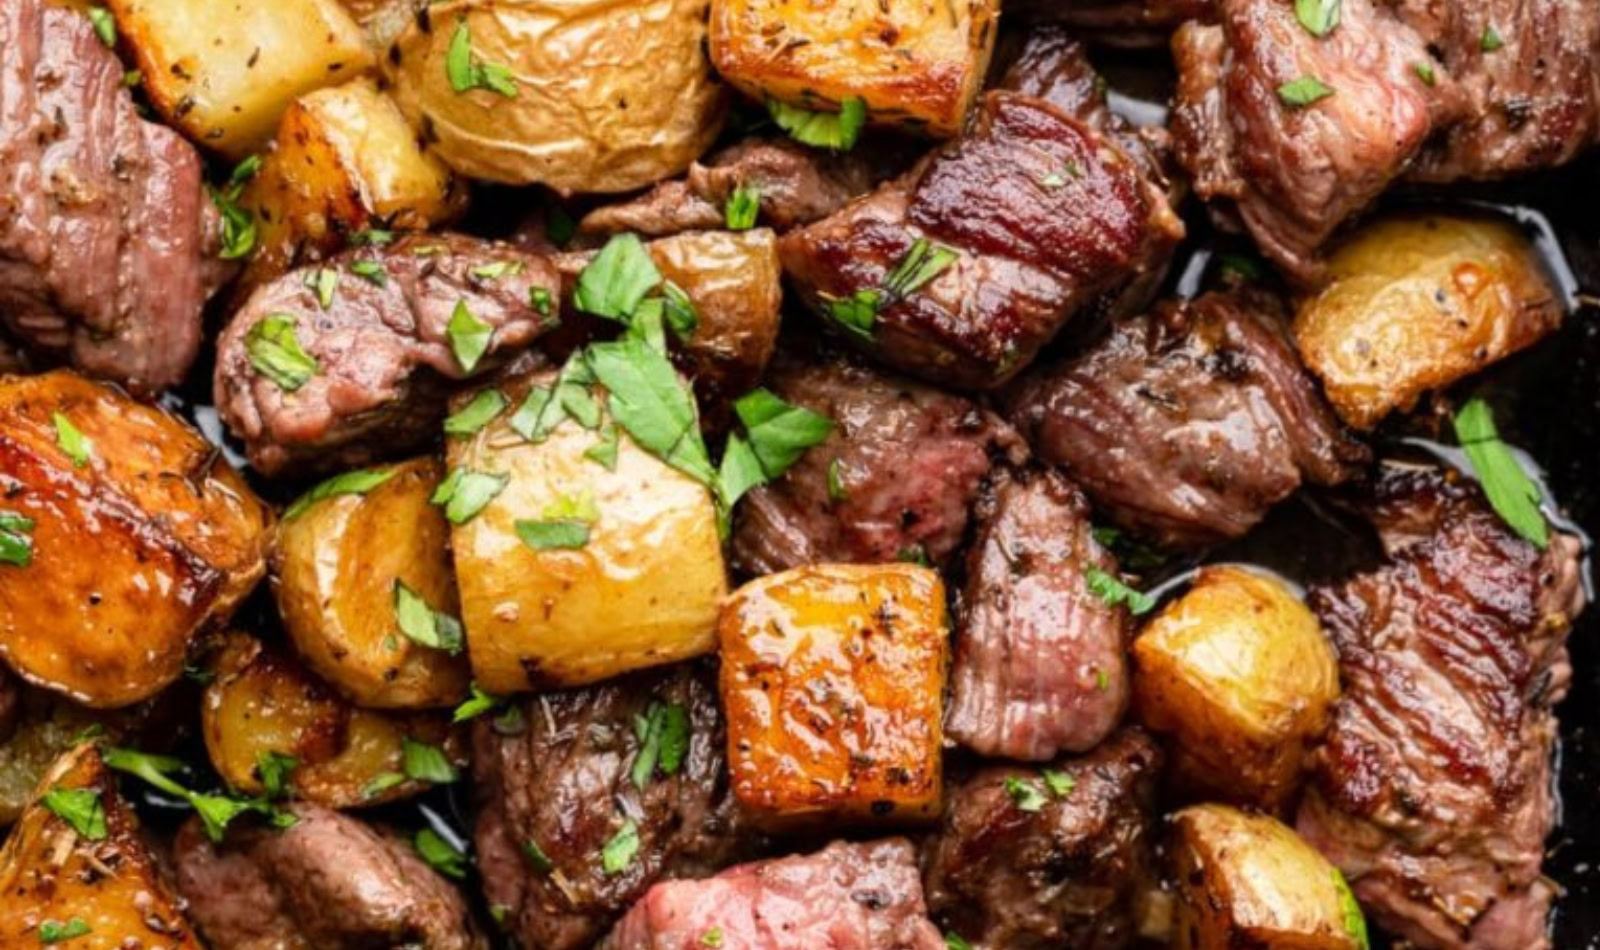 juicy bits of steak bites, garlic butter and potatoes with some green herbs